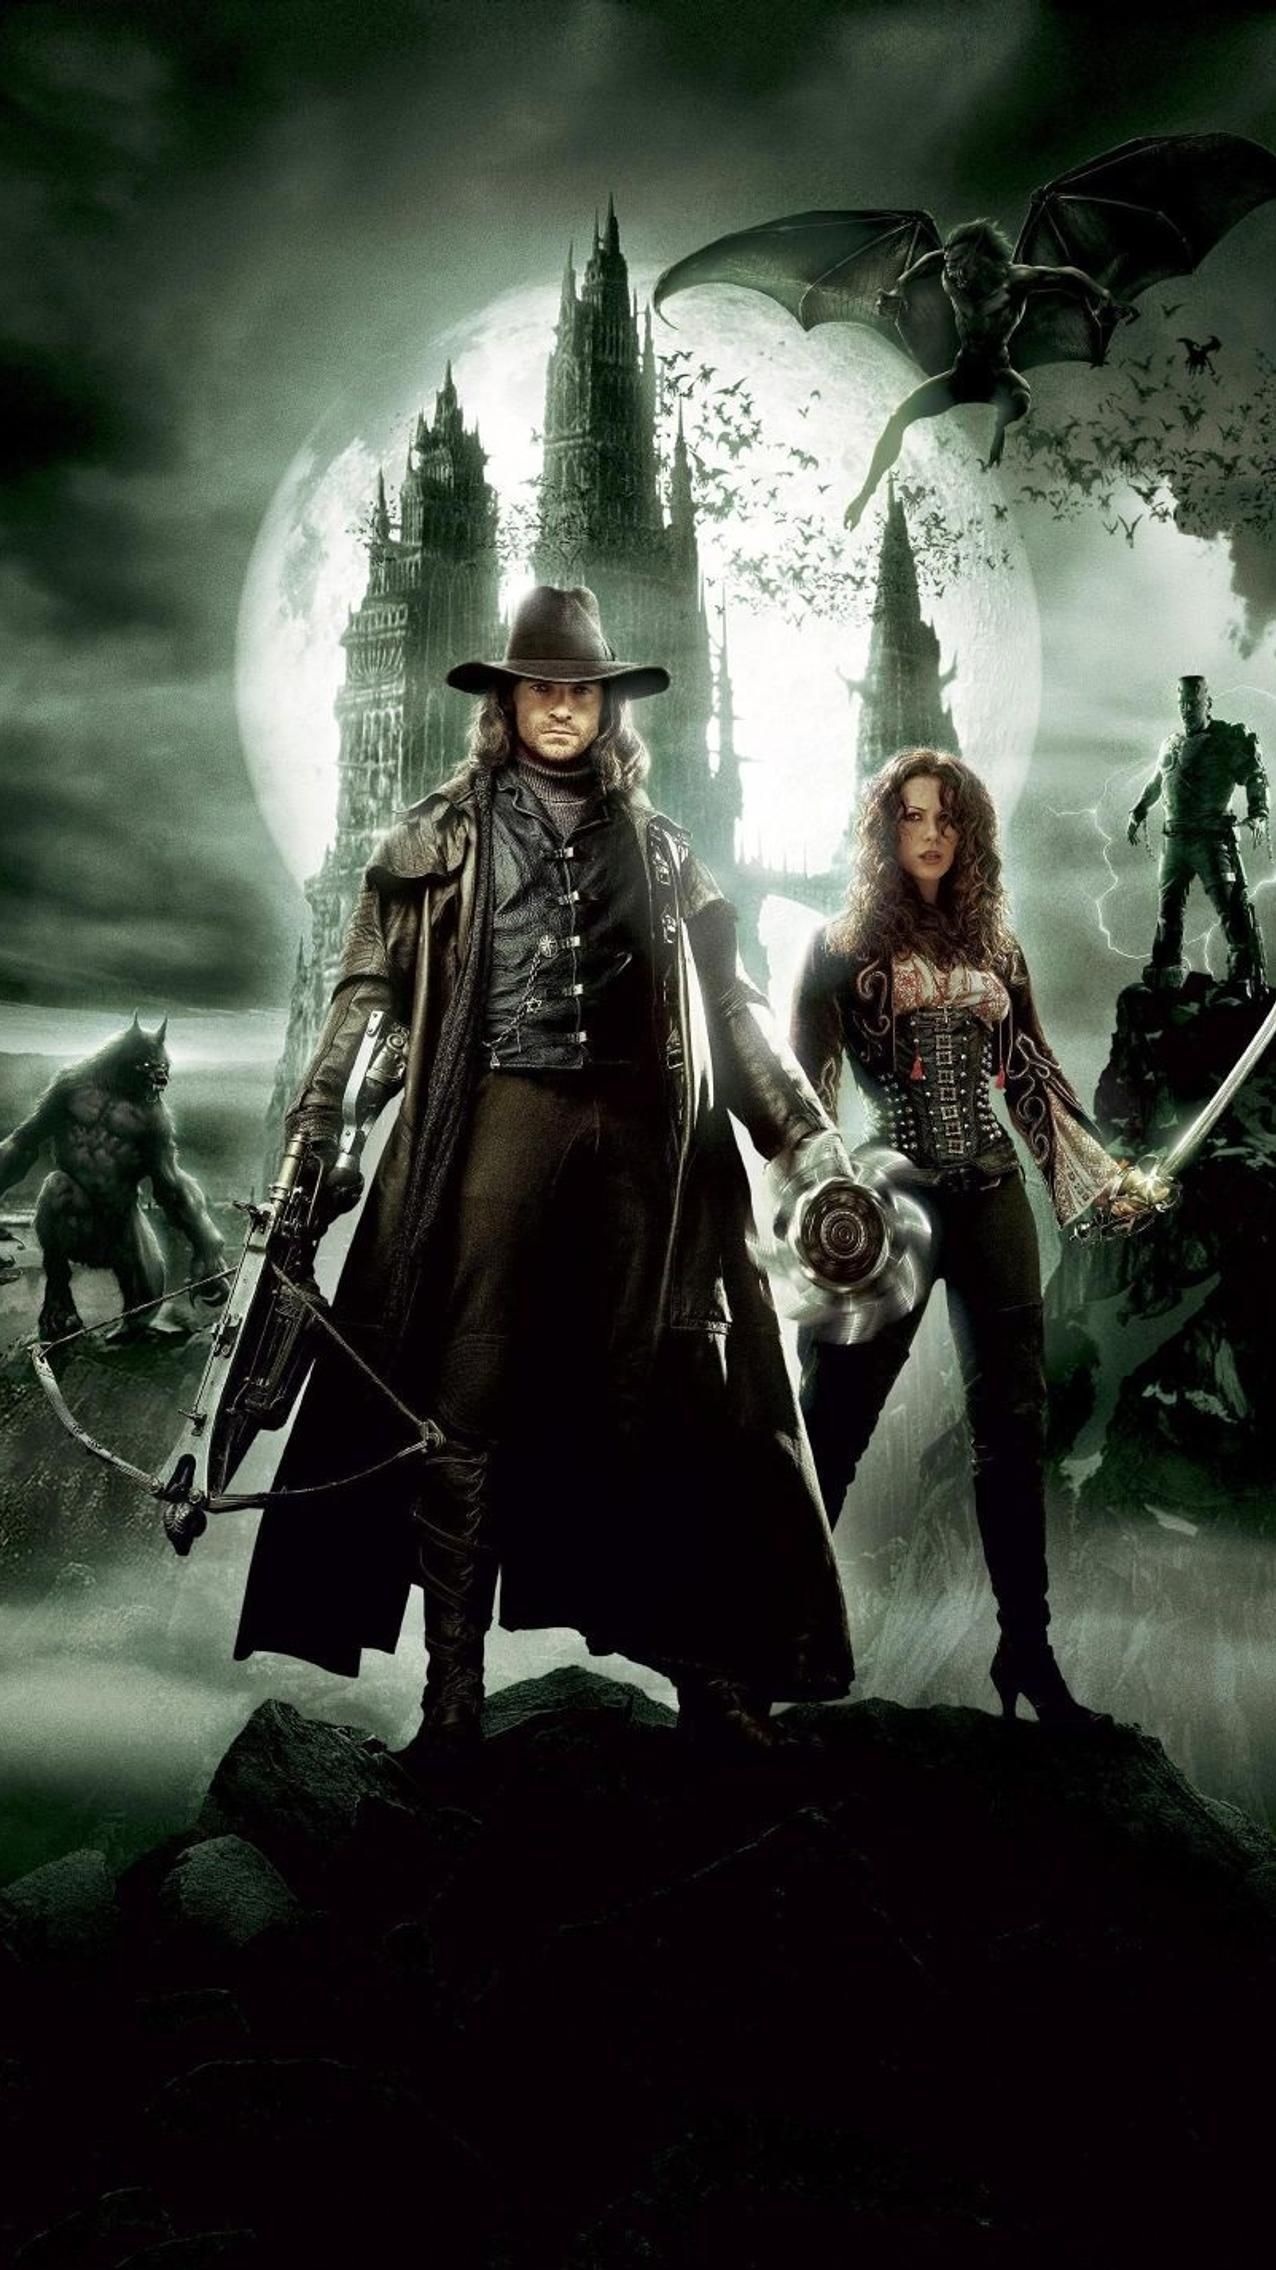 Van Helsing: The film earned $51 million at No. 1 during the opening weekend of May 7–9, 2004. 1280x2270 HD Wallpaper.